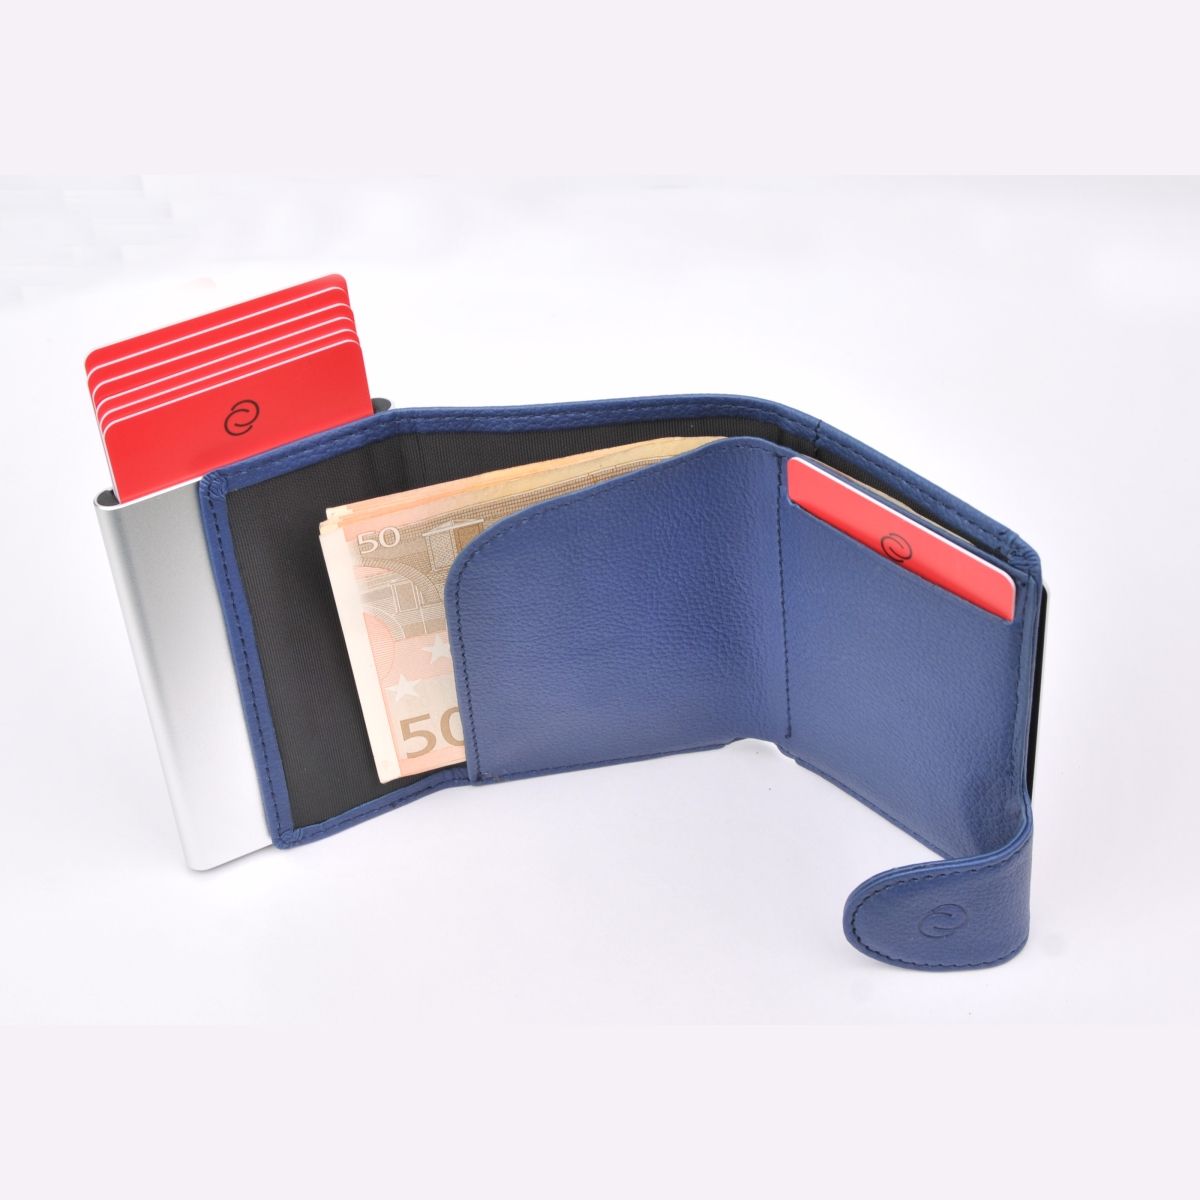 C-Secure Aluminum Card Holder with Genuine Leather and Coin Pouch - Blue Marino